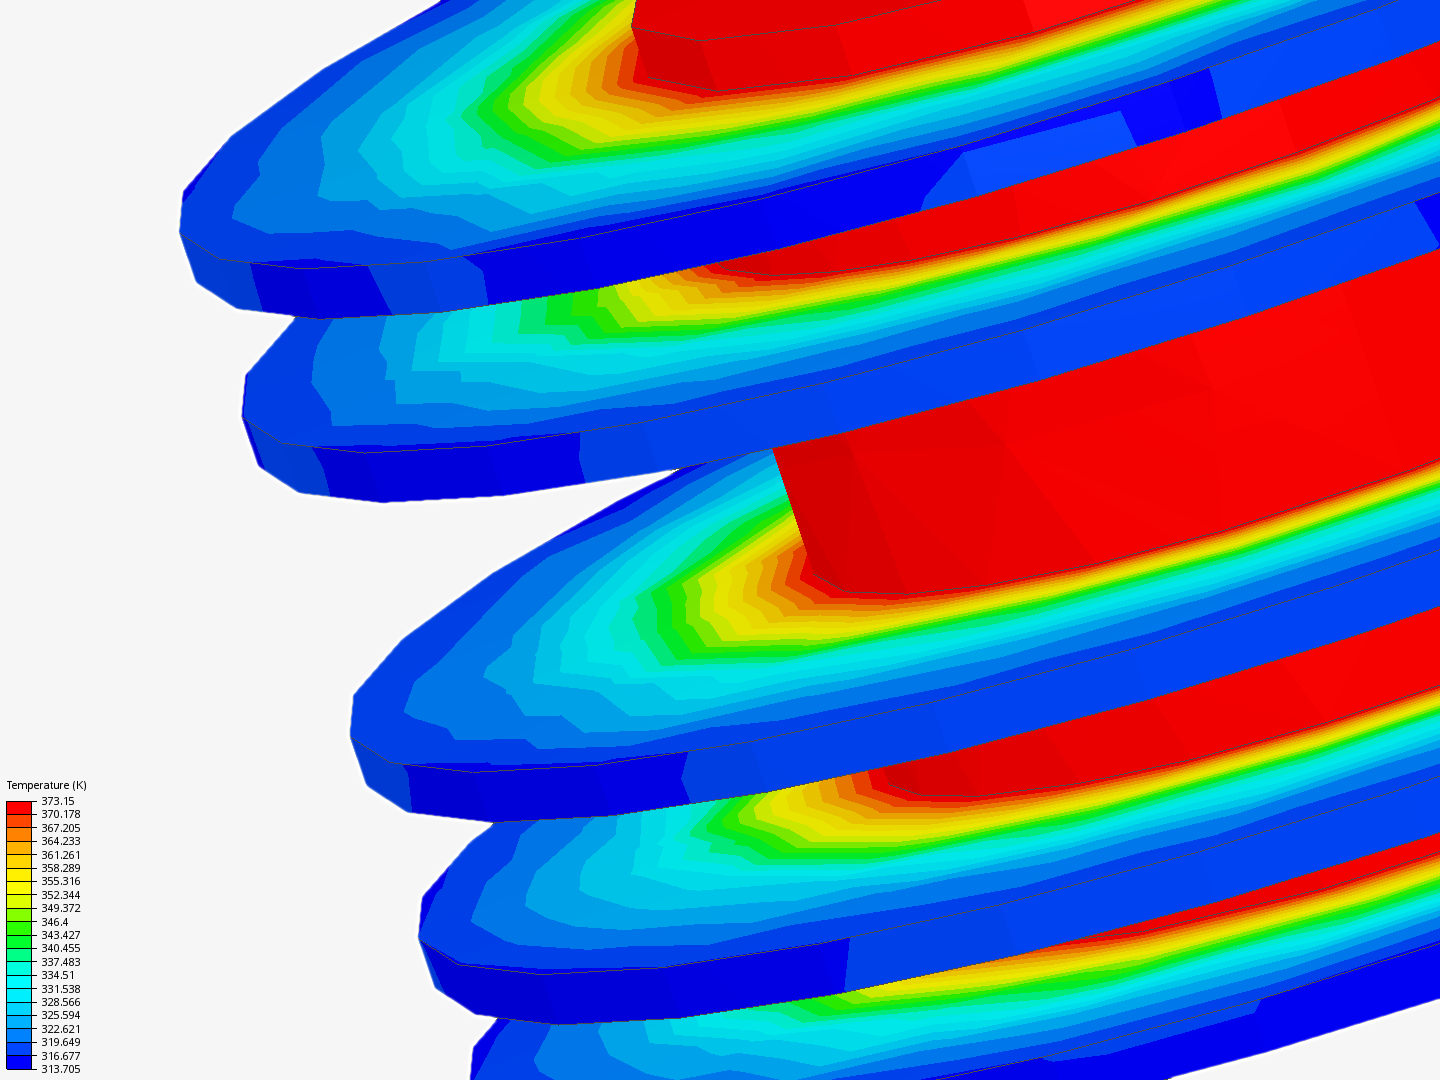 annulus fins image